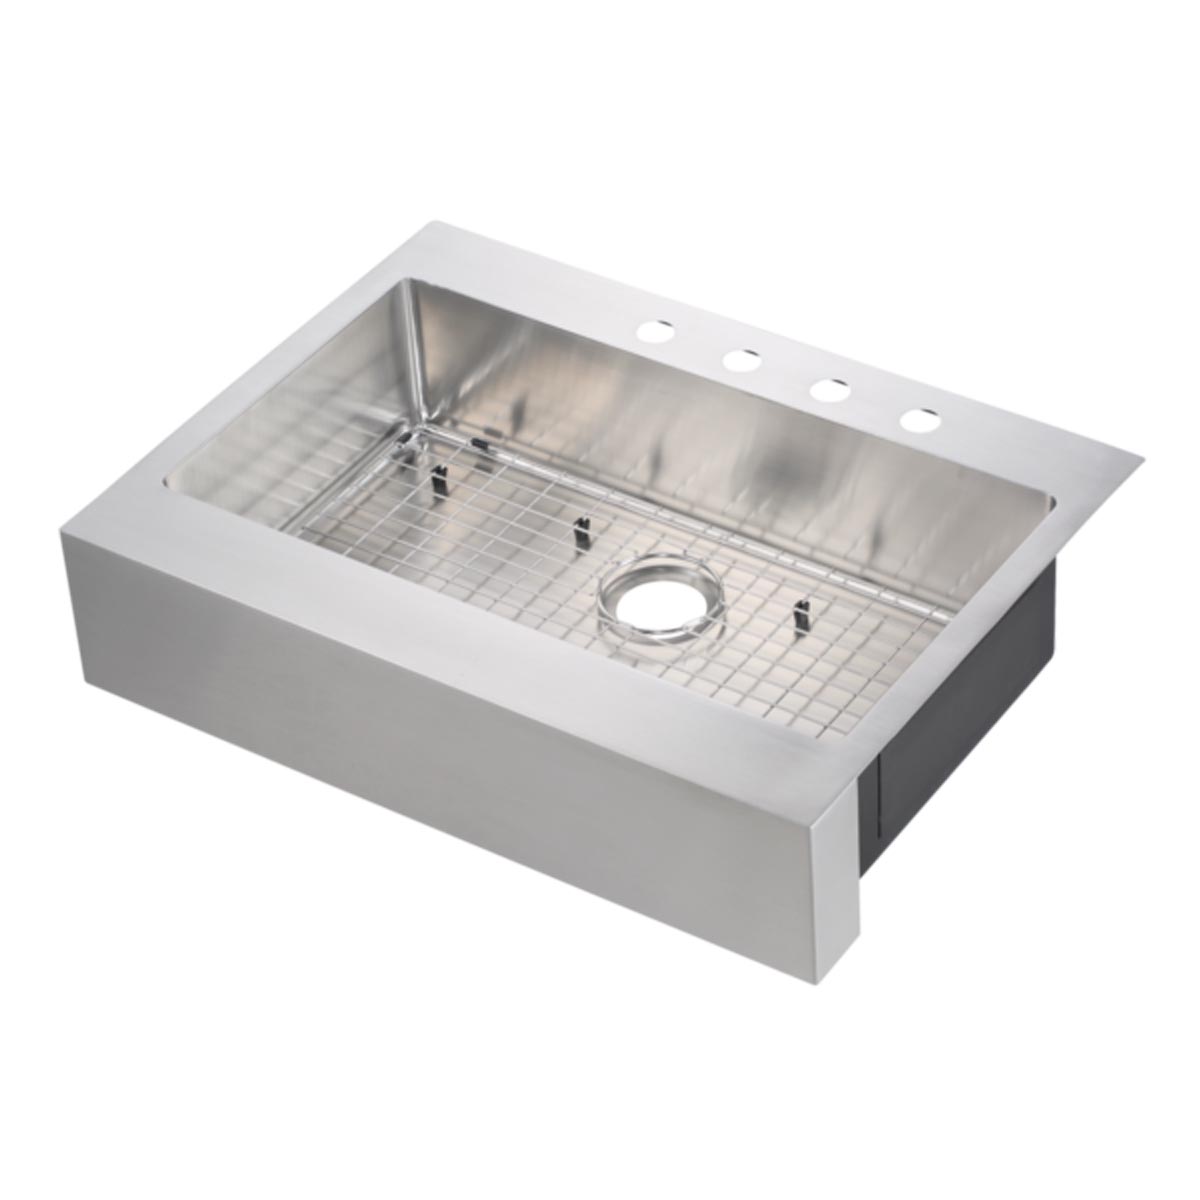 33 X 24 Stainless Steel Farm Sink Flat Apron Front